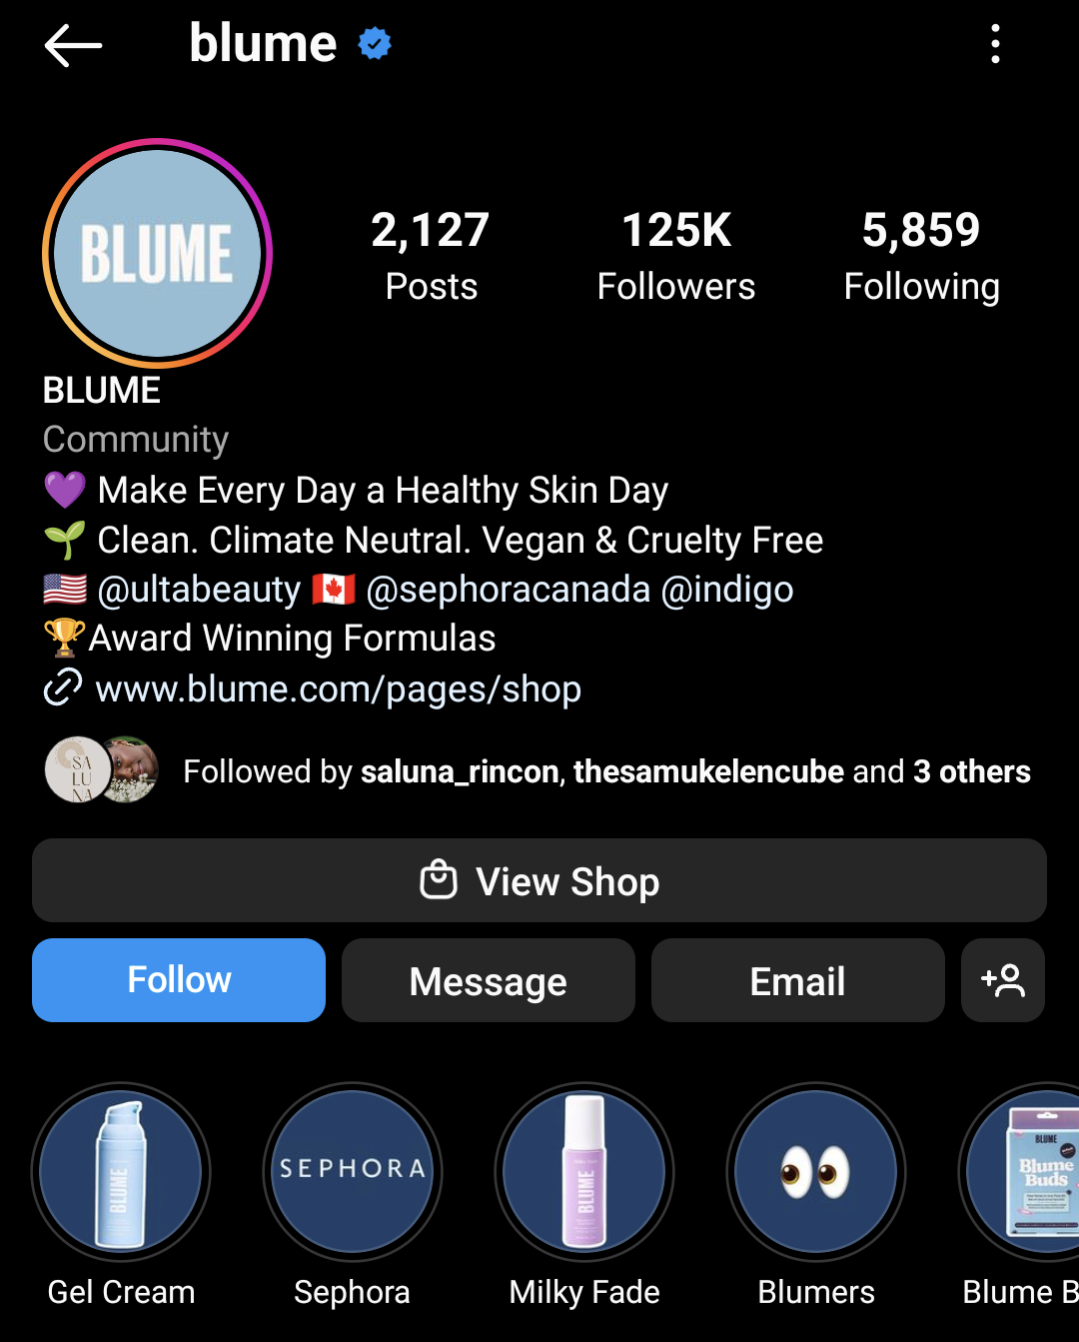 Blume's  Instagram bio is concise and witty